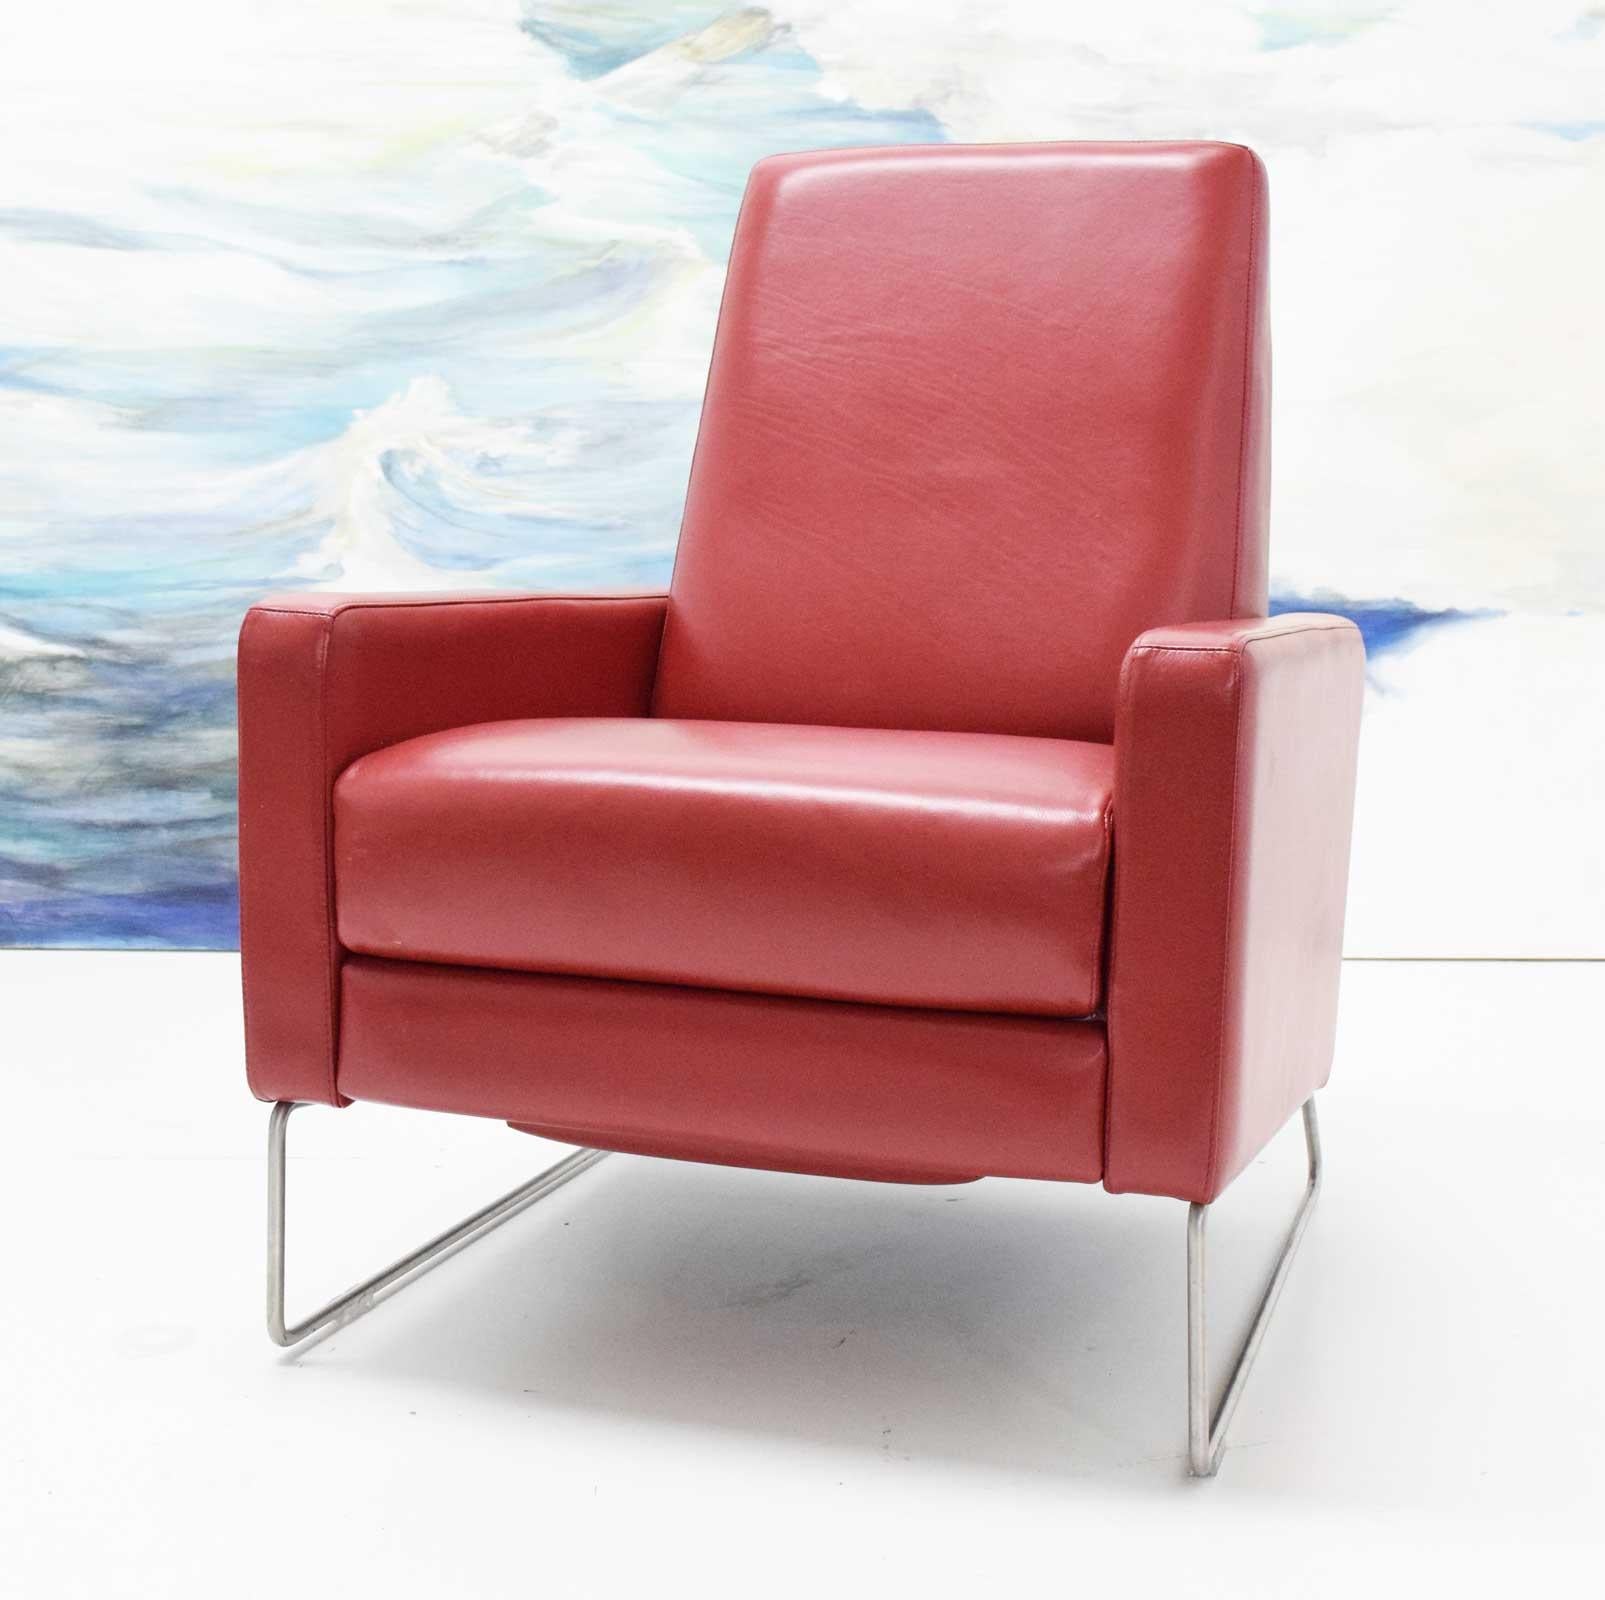 Executed in red leather with a chrome base. Looks great. 
Armed with experience designing ergonomic in-flight seating for private jets, Bernett knew how to create a comfortable chair with none of the bulkiness or macho pretense of a traditional